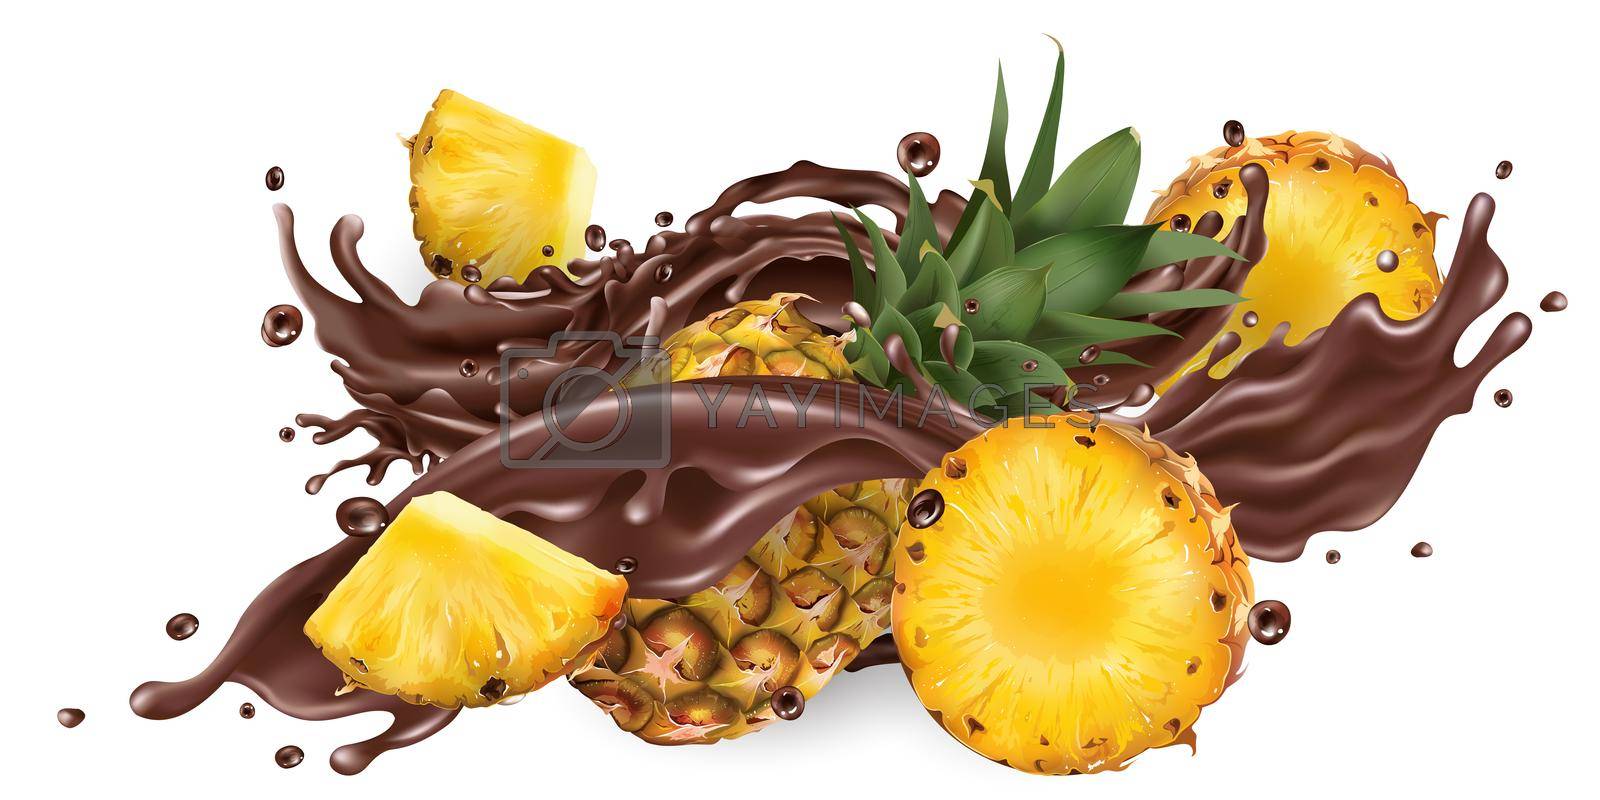 Royalty free image of Splash of liquid chocolate and fresh pineapples. by ConceptCafe